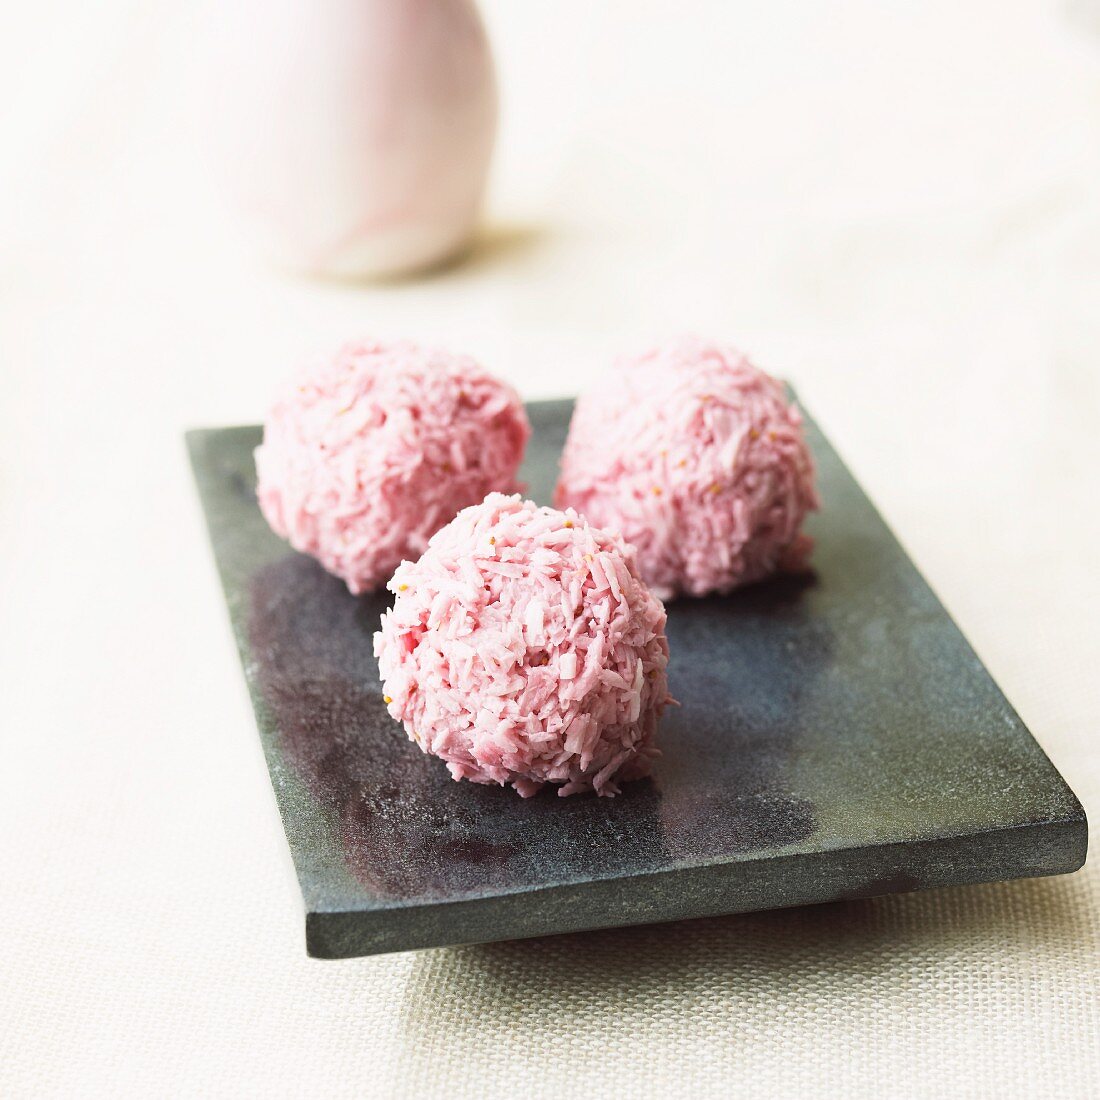 Strawberry and coconut balls